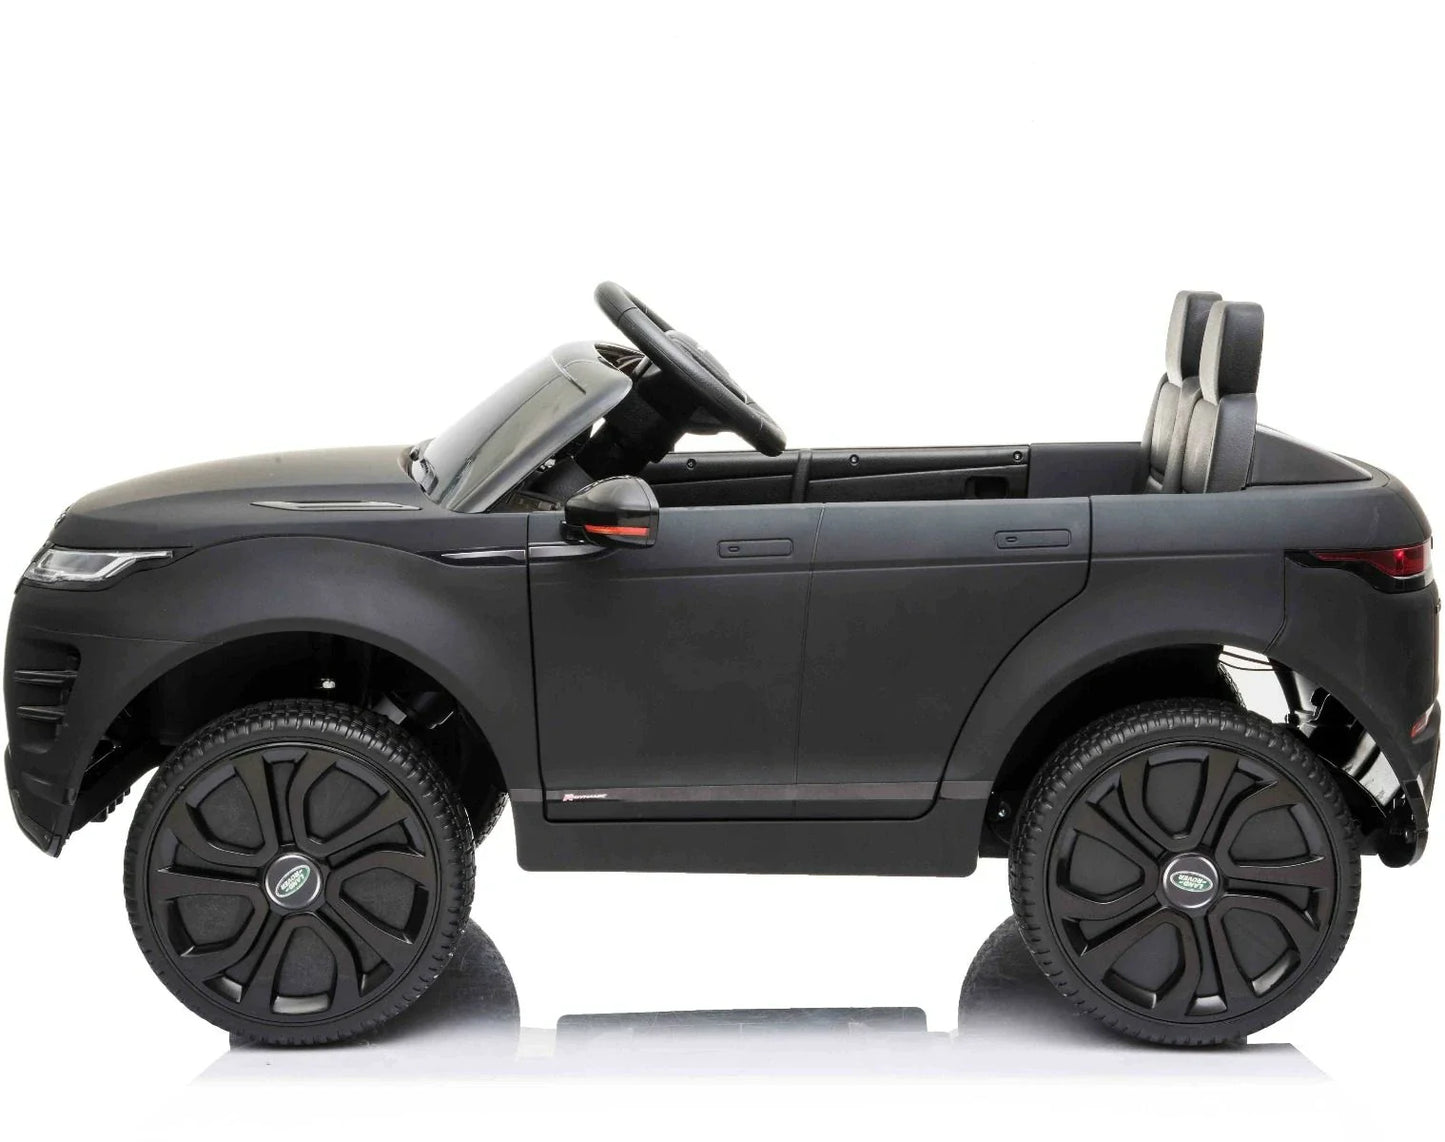 Matte Black Range Rover Evoque Kids Electric Ride on Car with Parental Control on a white background, side view.